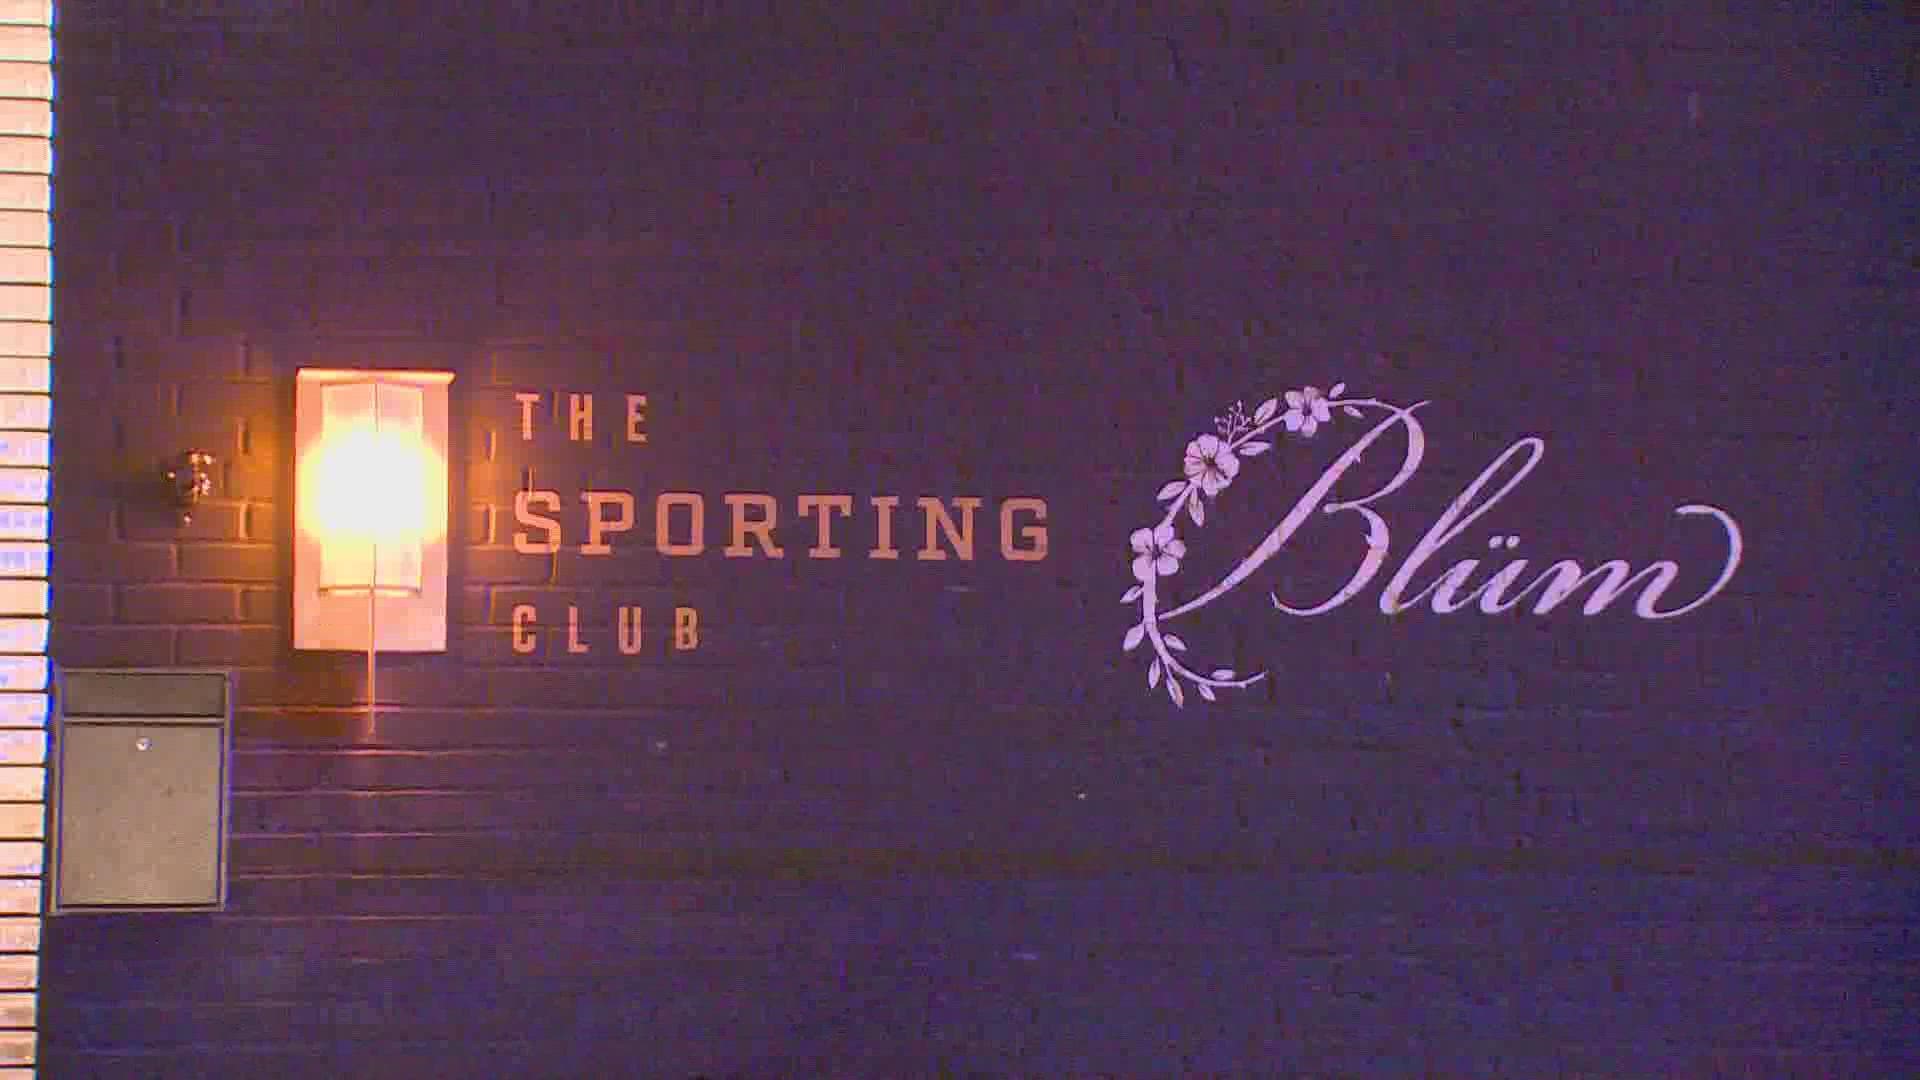 Dallas officers told WFAA that they heard gunshots coming from Blum at the Sporting Club. When they got in, they found the victim dead at the scene.